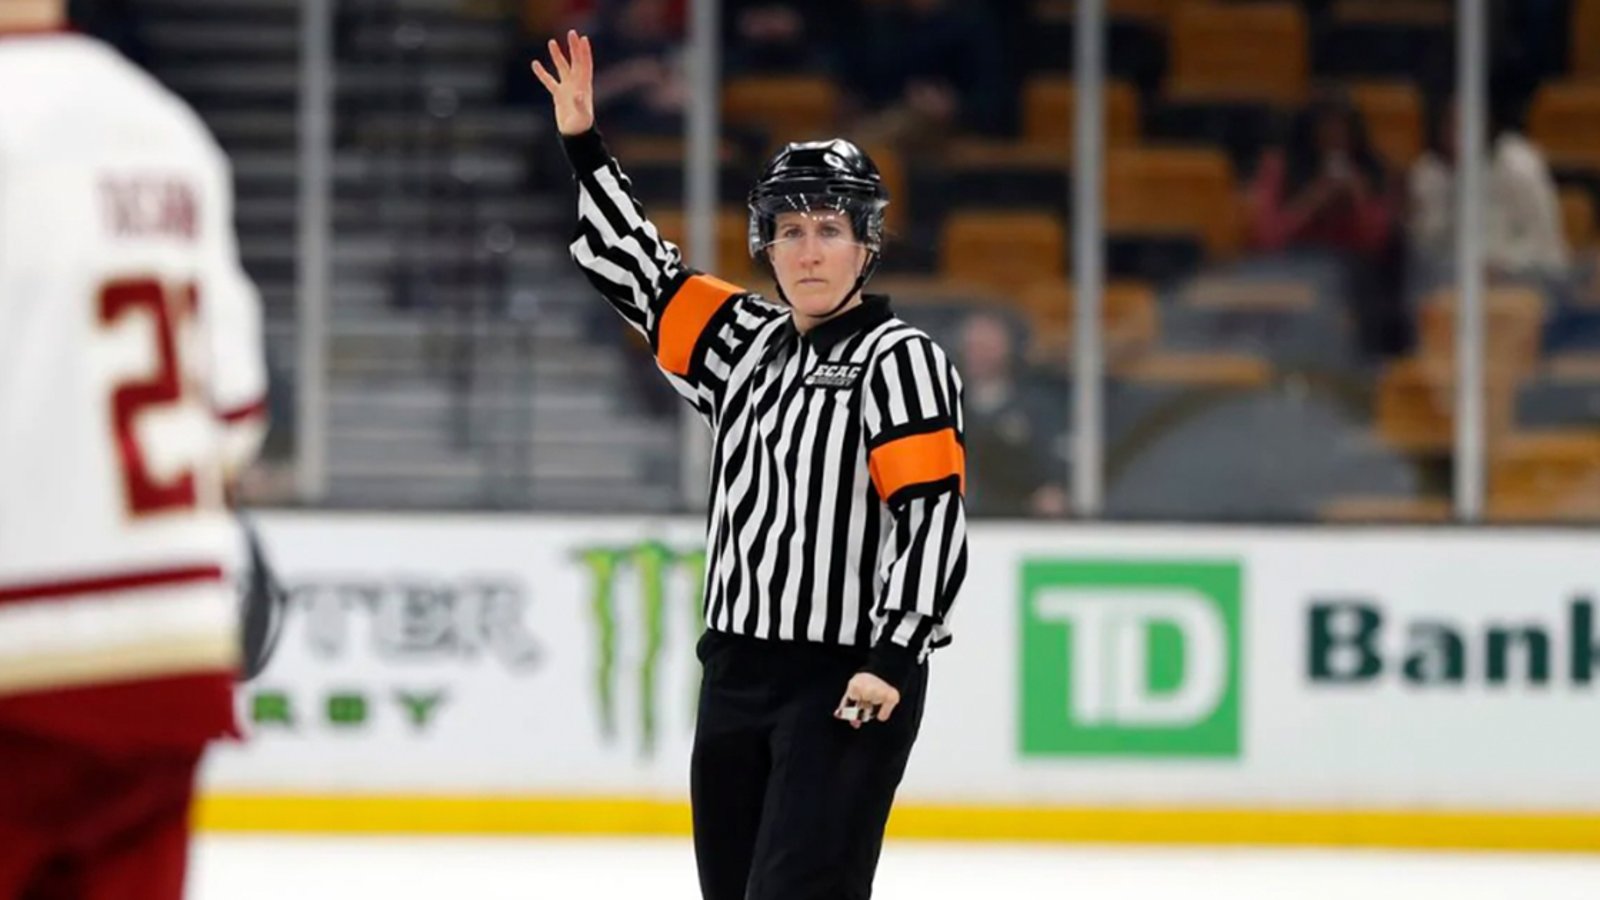 Report: Female referees coming to NHL